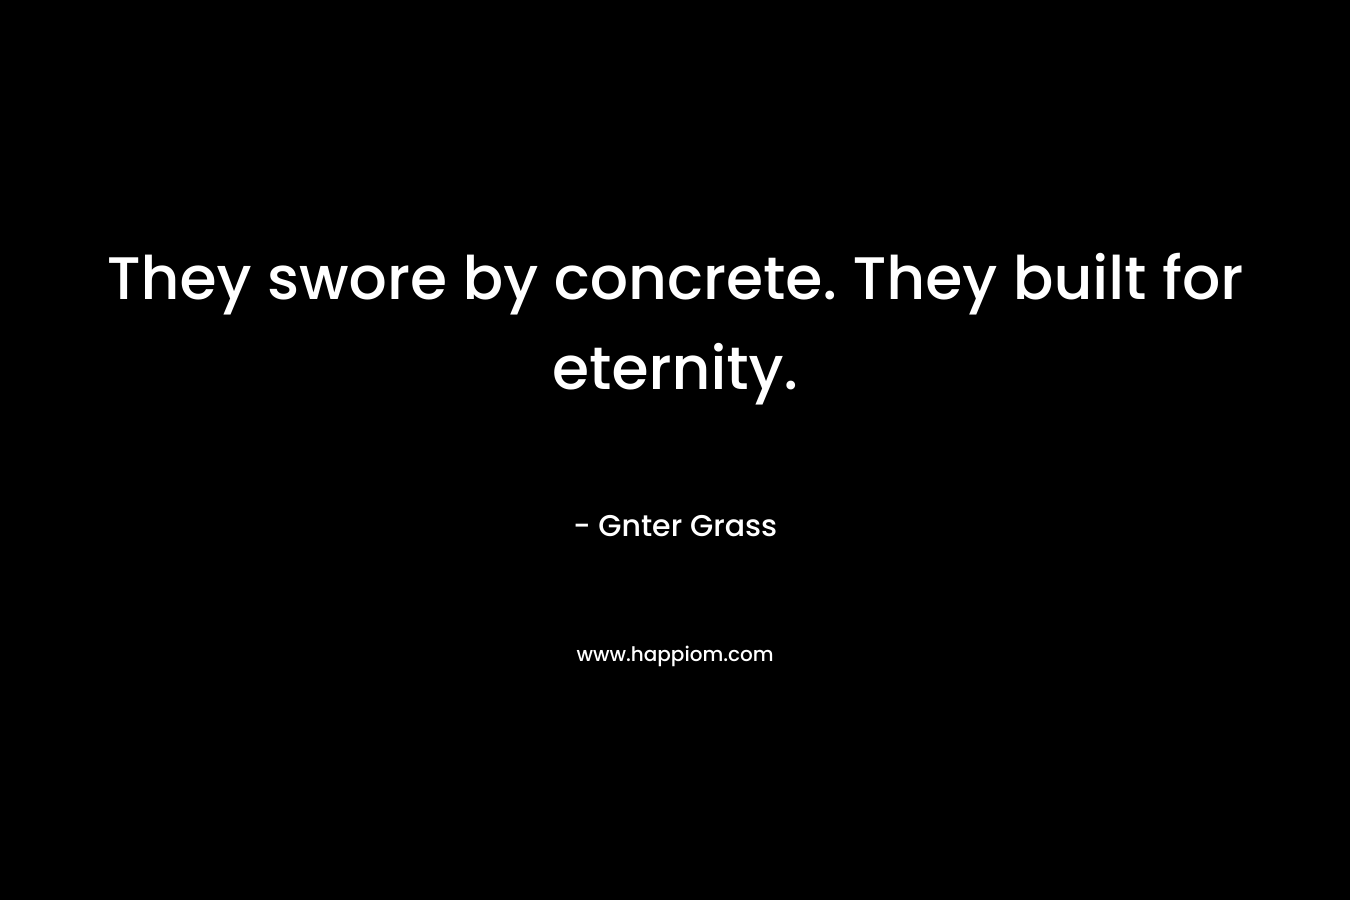 They swore by concrete. They built for eternity.